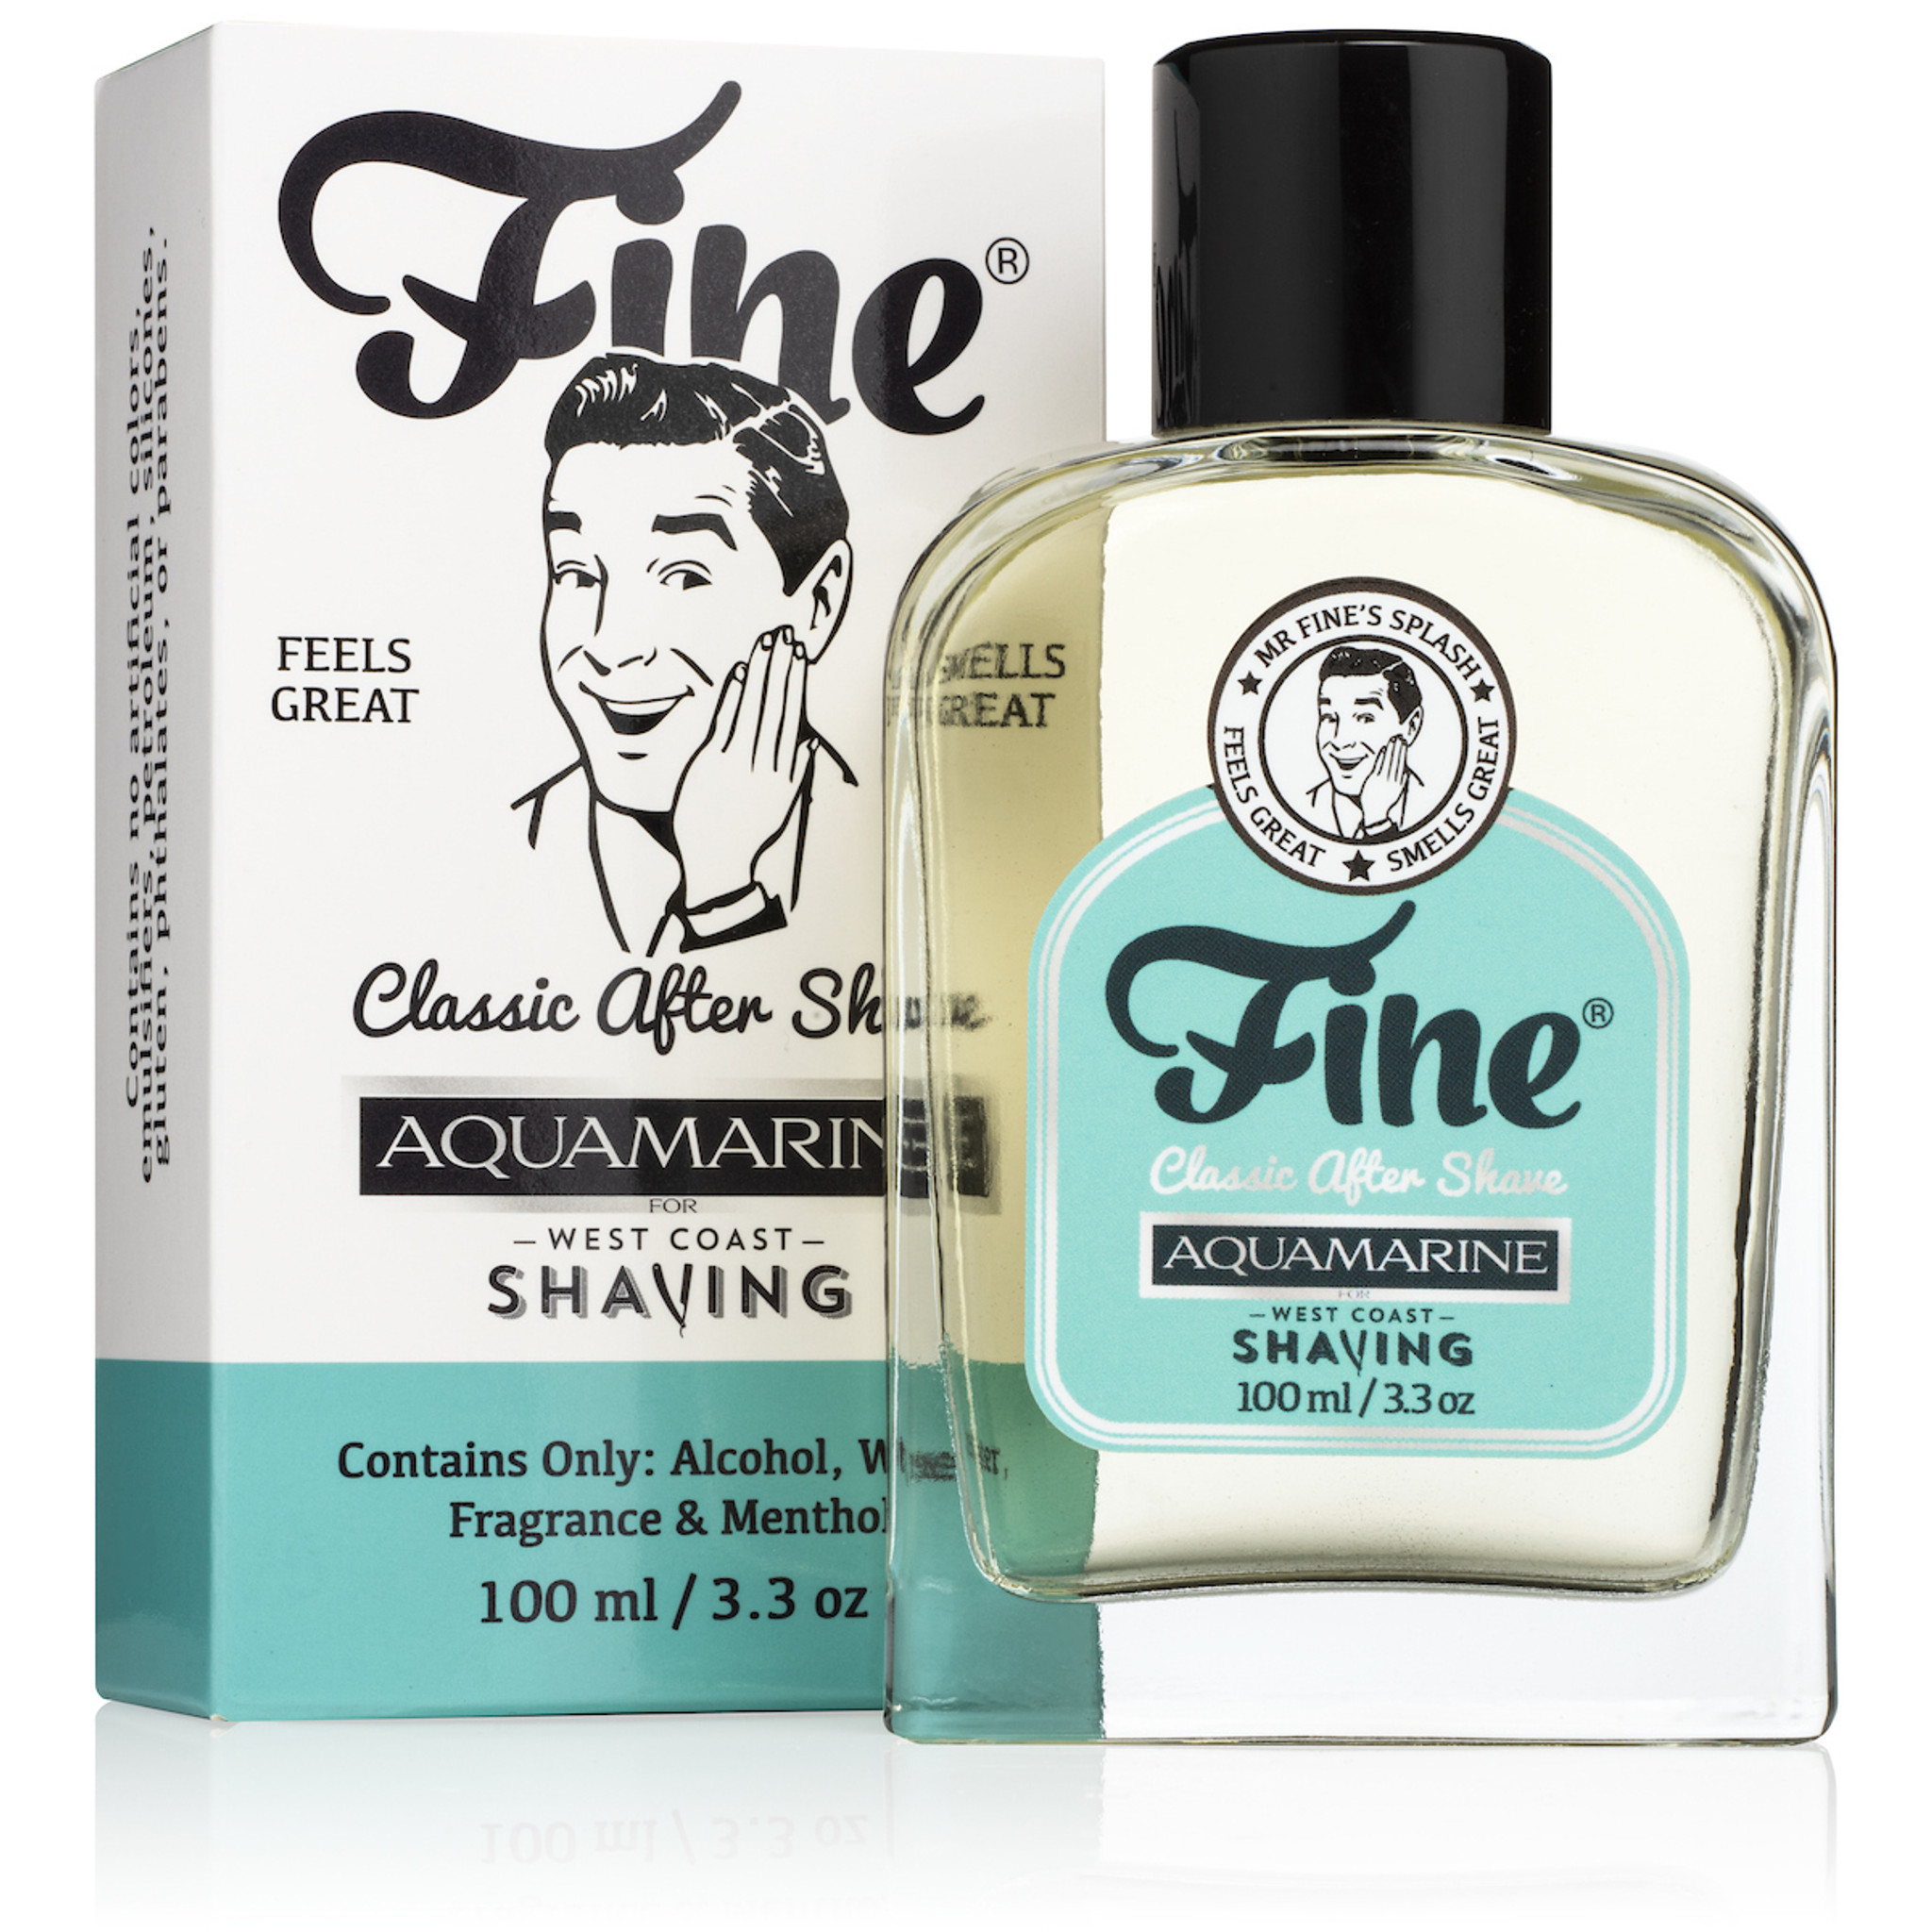 Fine Accoutrements Aftershave Products & Accessories